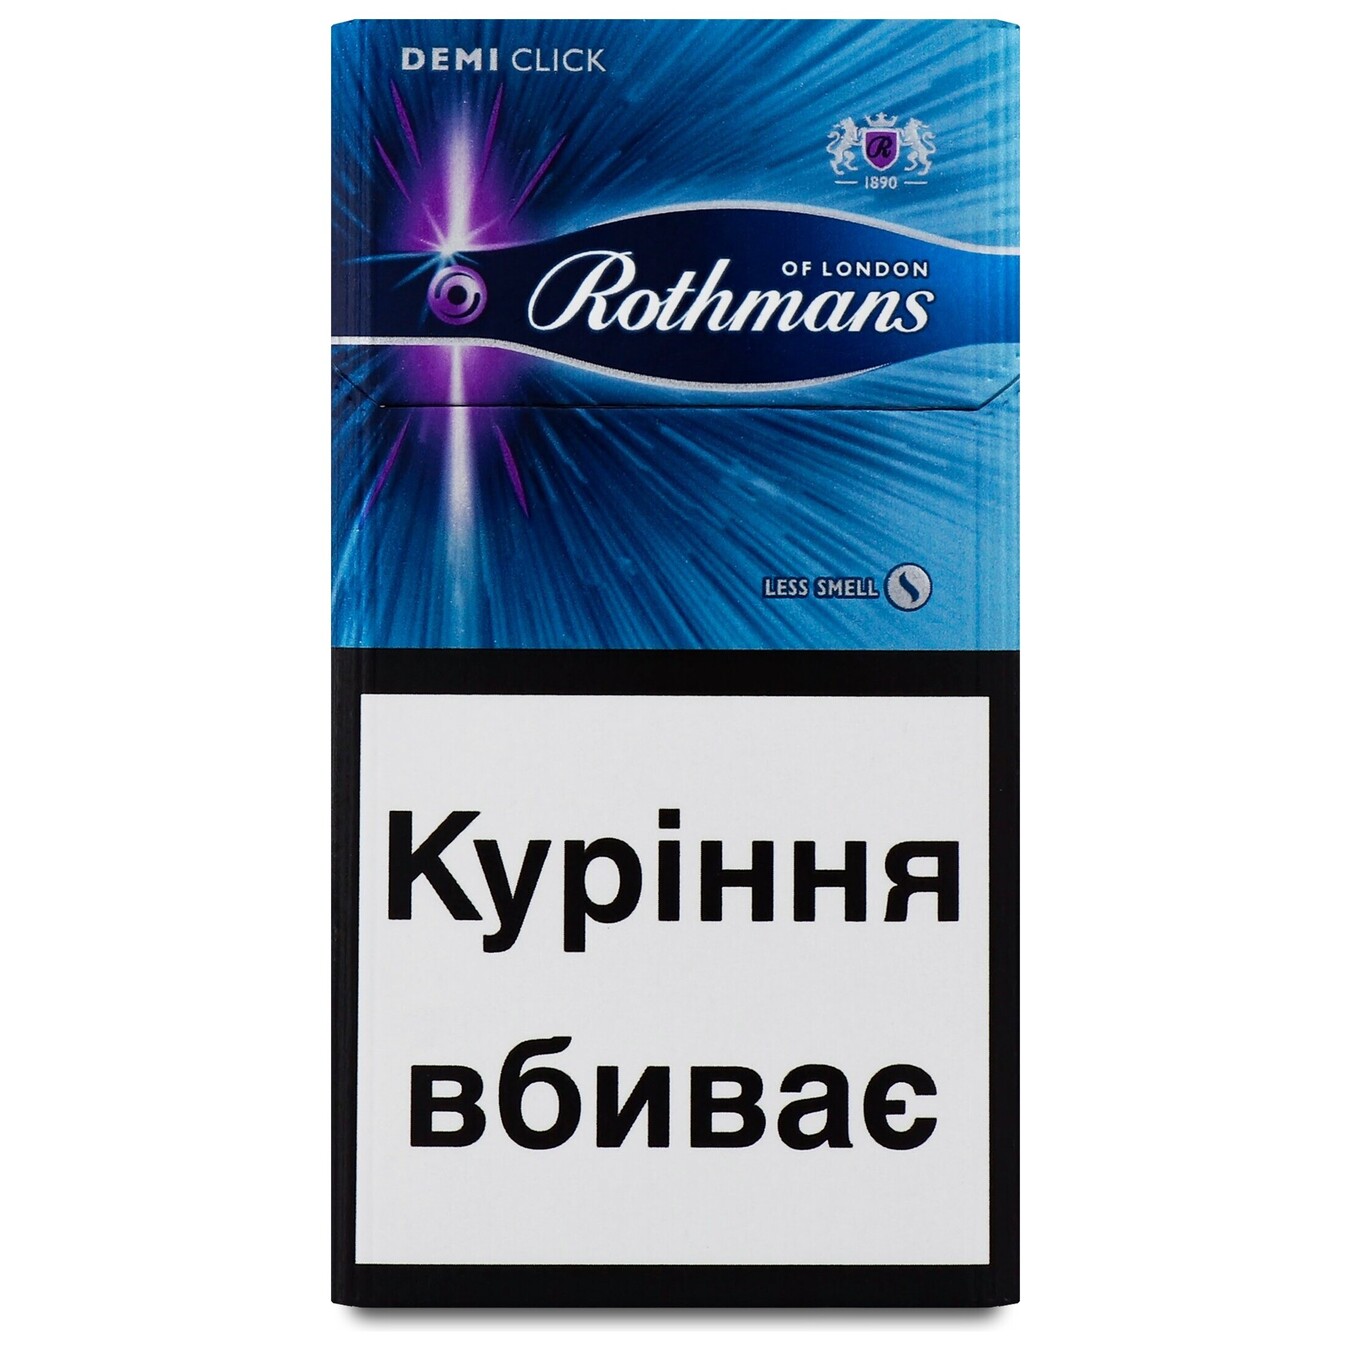 Cigarettes Rothmans Demi Click Purple 20 pcs (the price is indicated without excise tax)